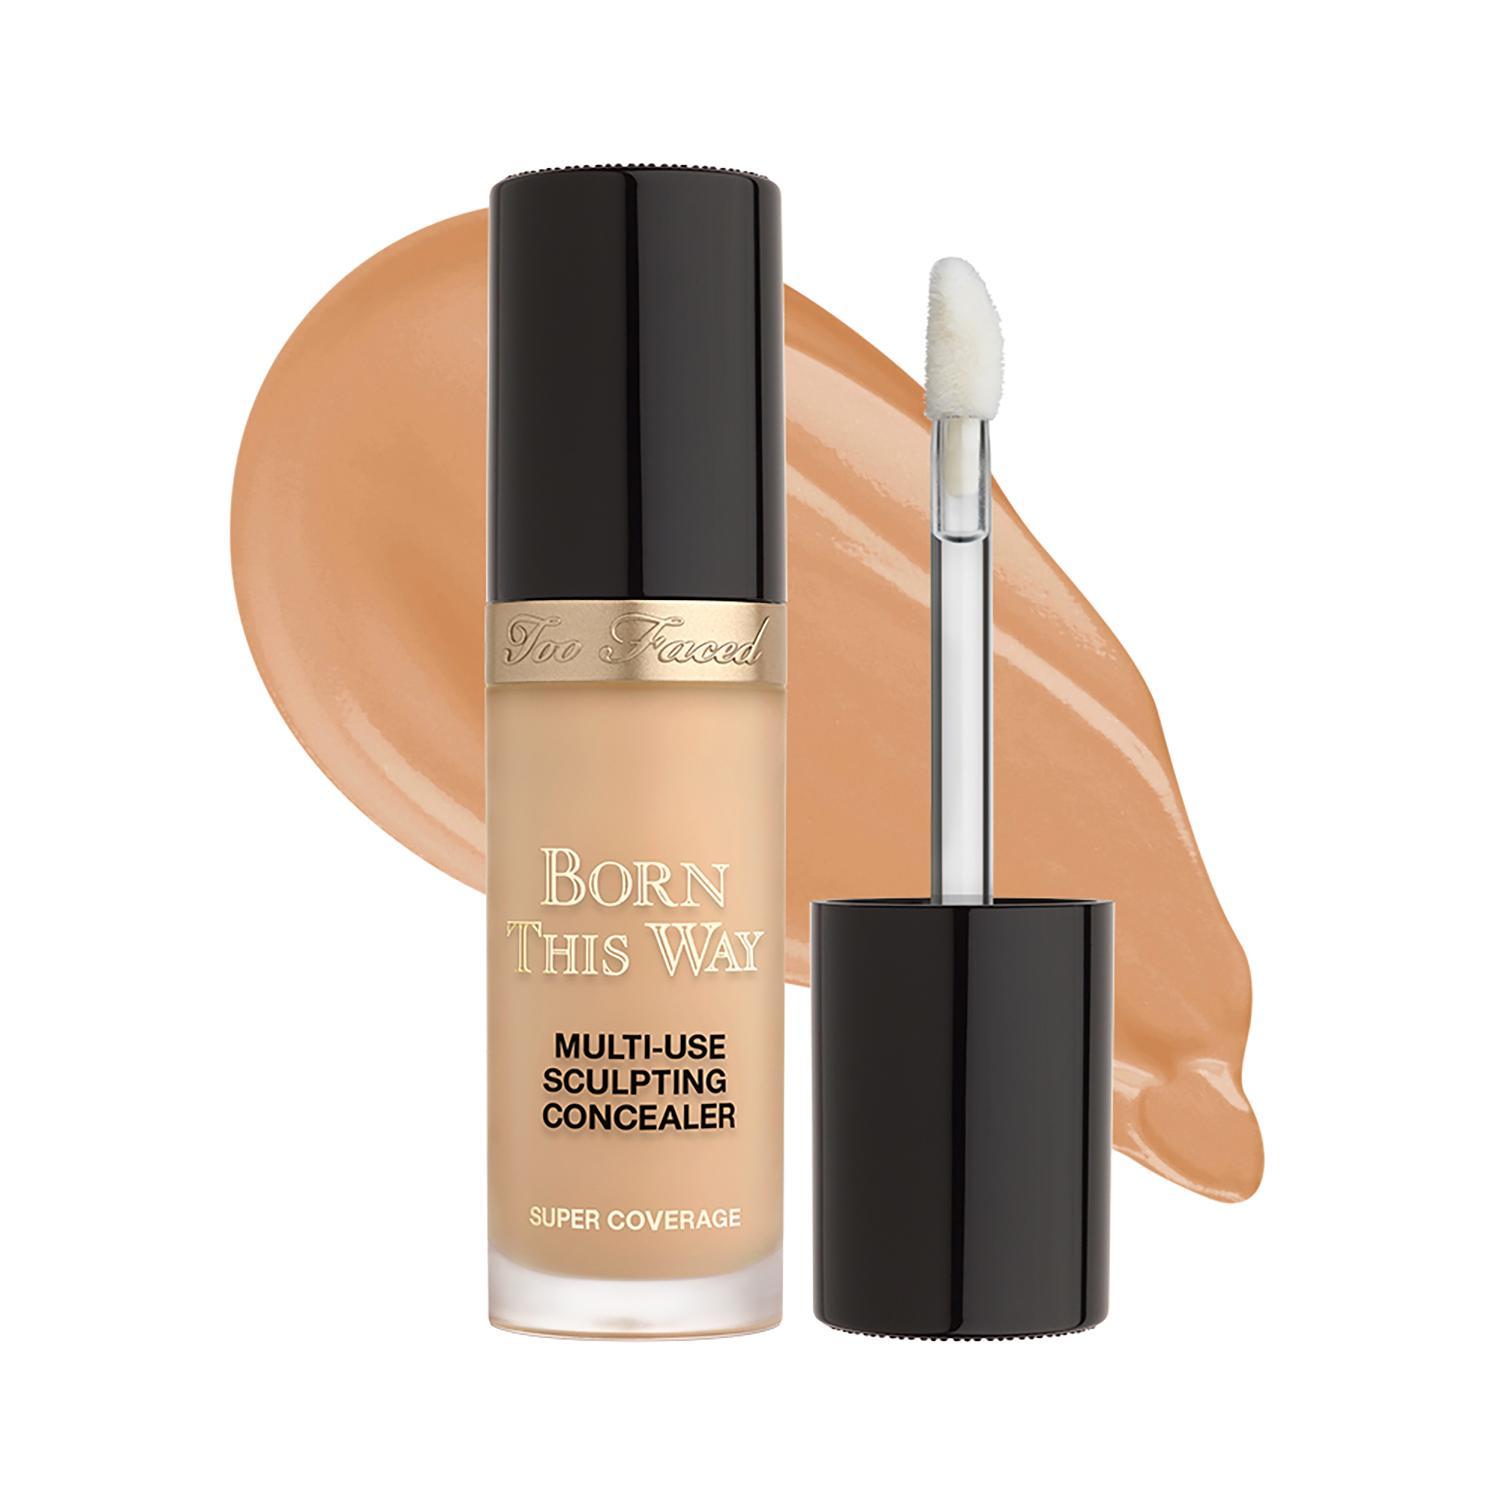 too faced born this way super coverage multi use sculpting concealer- warm beige (13.5ml)